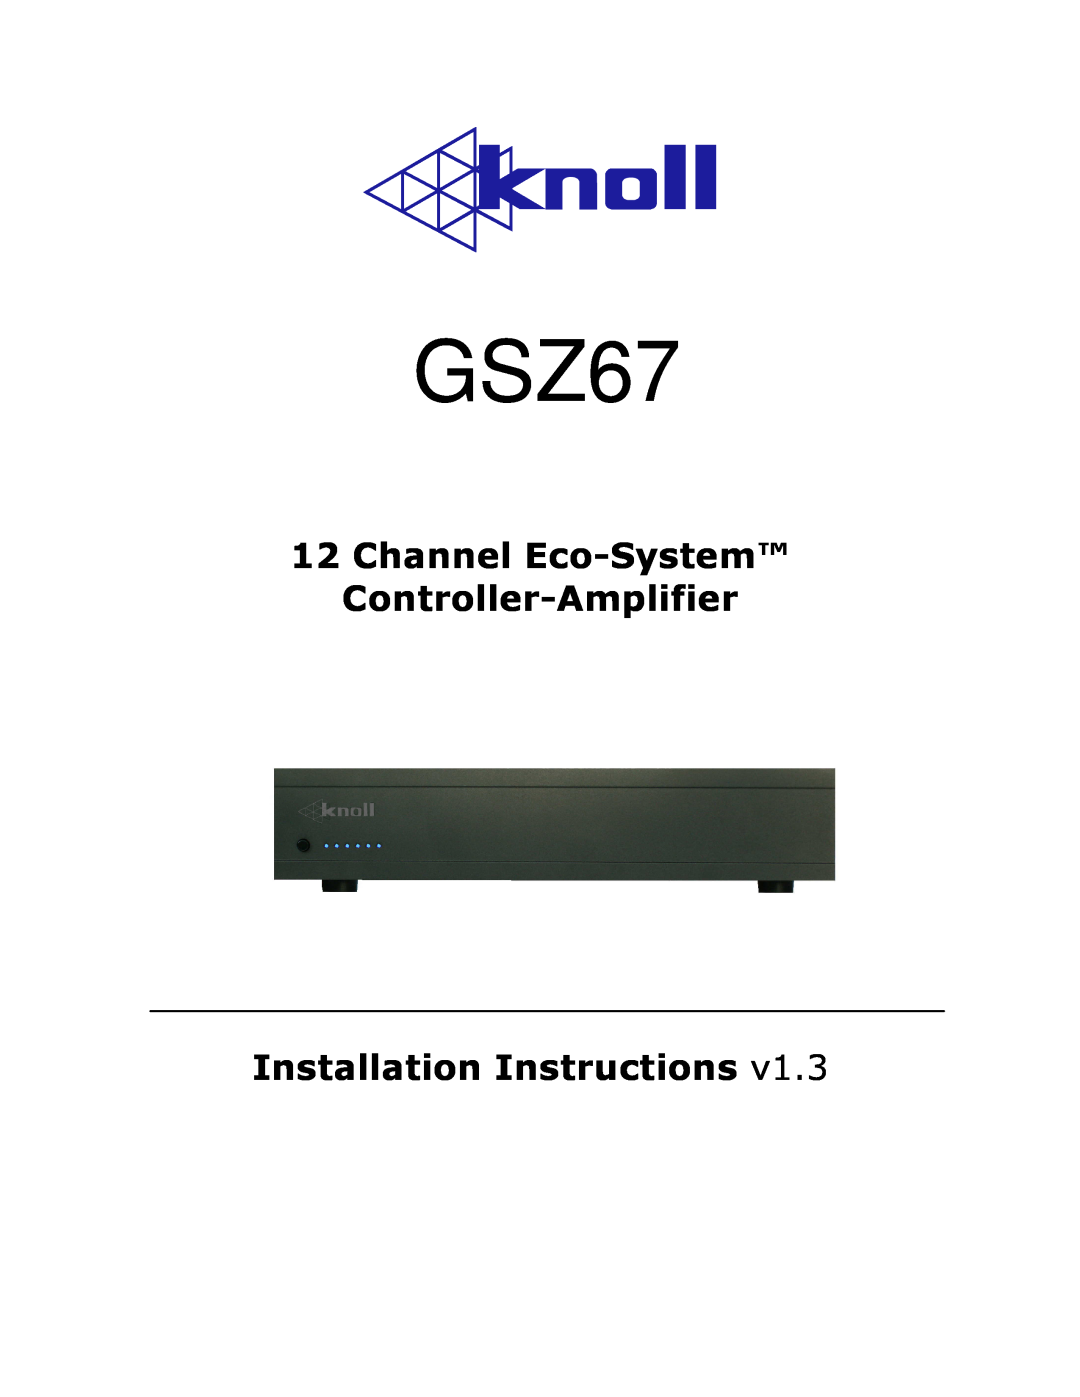 Ariston GSZ67 installation instructions 12Channel Eco-System Controller-Amplifier, Installation Instructions 